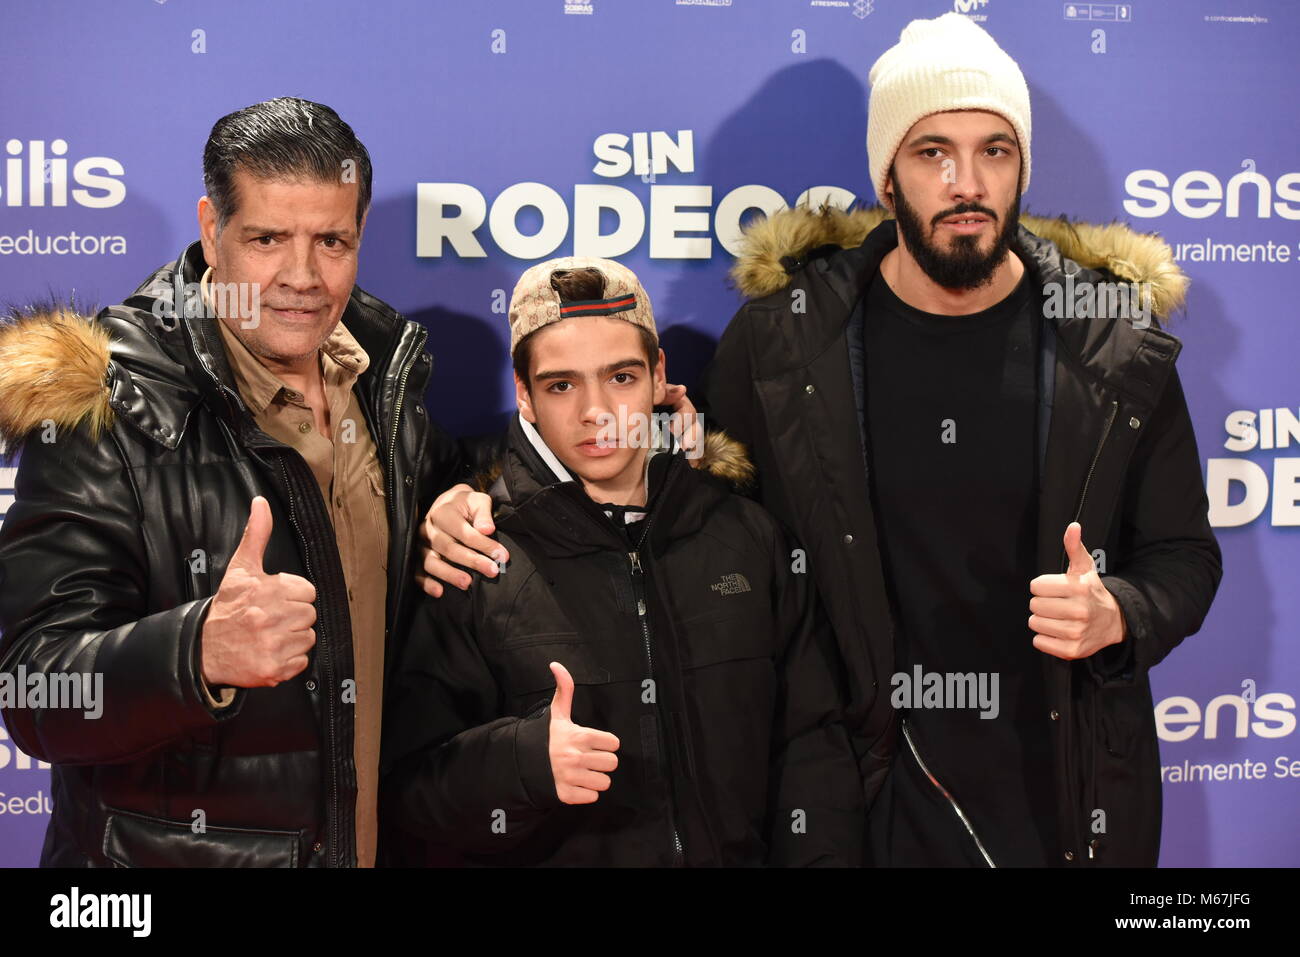 Madrid, Spain. 28th Feb, 2018. The Spanish singer Emilio González García (left) poses, with his sons, for media during a photocall for the premiere of 'Sin Rodeos' at Capitol cinema in Madrid. Credit: Jorge Sanz/Pacific Press/Alamy Live News Stock Photo